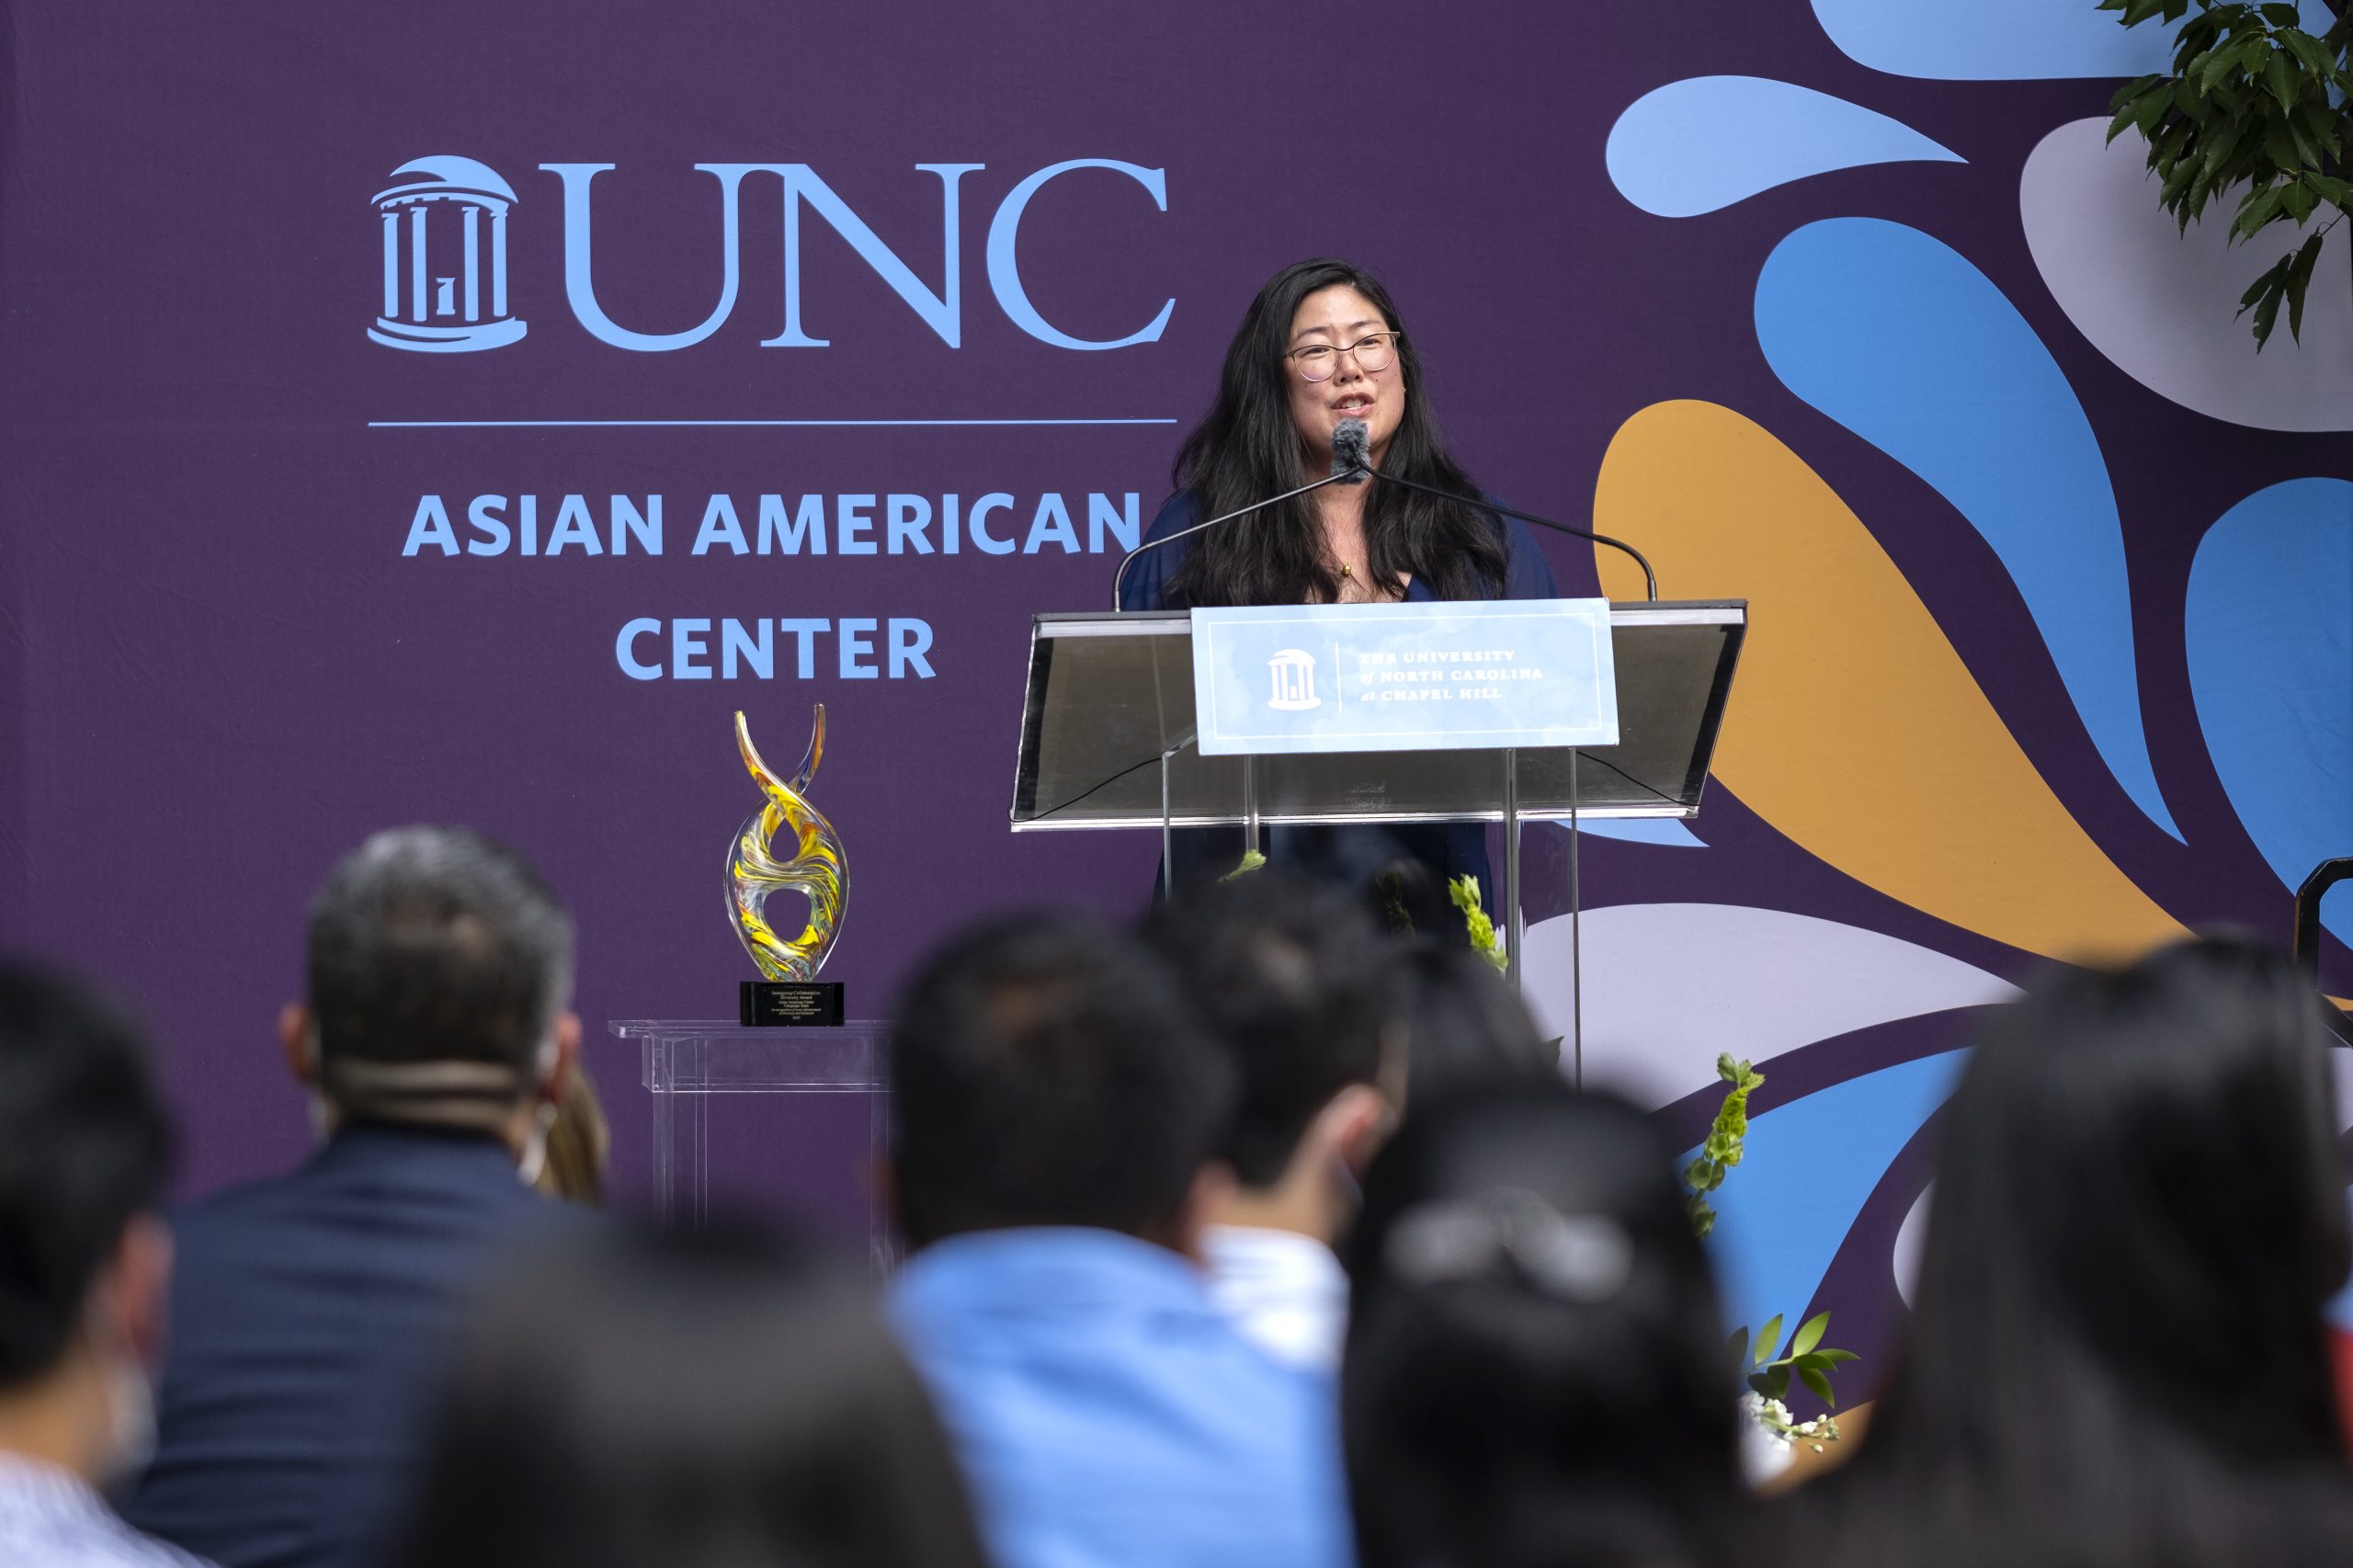 Asian American woman standing at a lecturn outside and addresses a crowd.